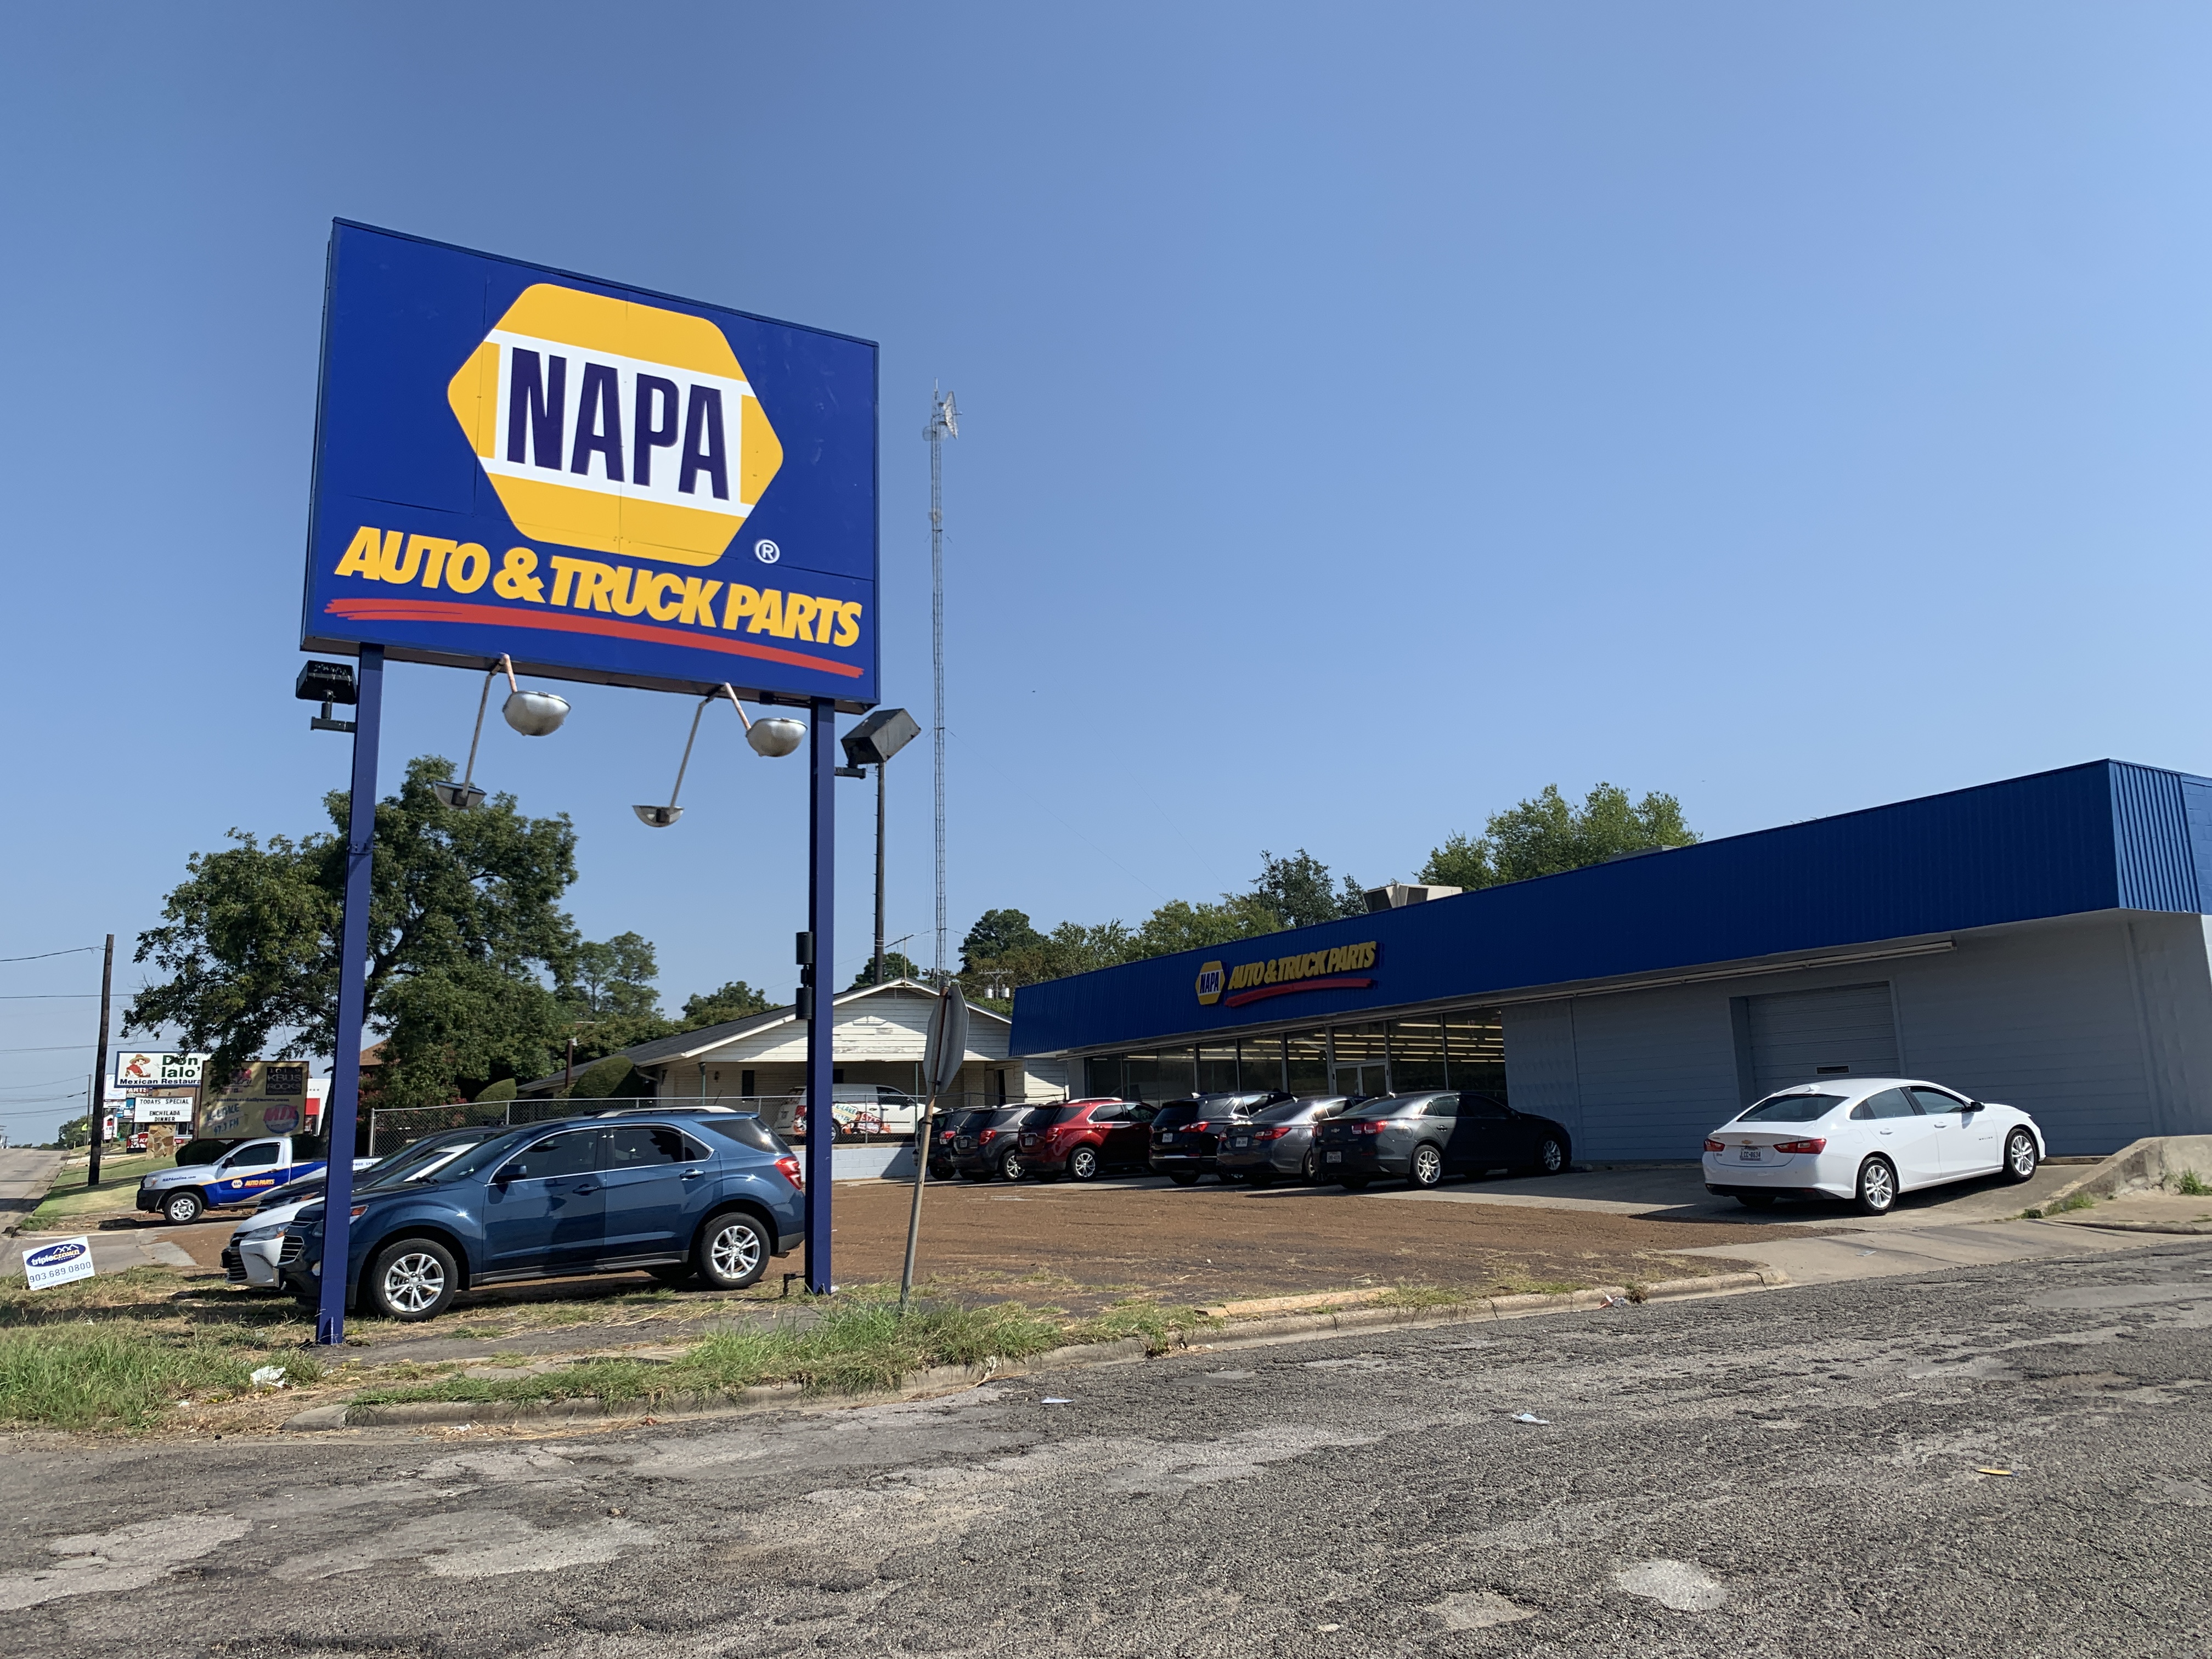 NAPA Auto Parts New Sulphur Springs Location Opening on September 3rd